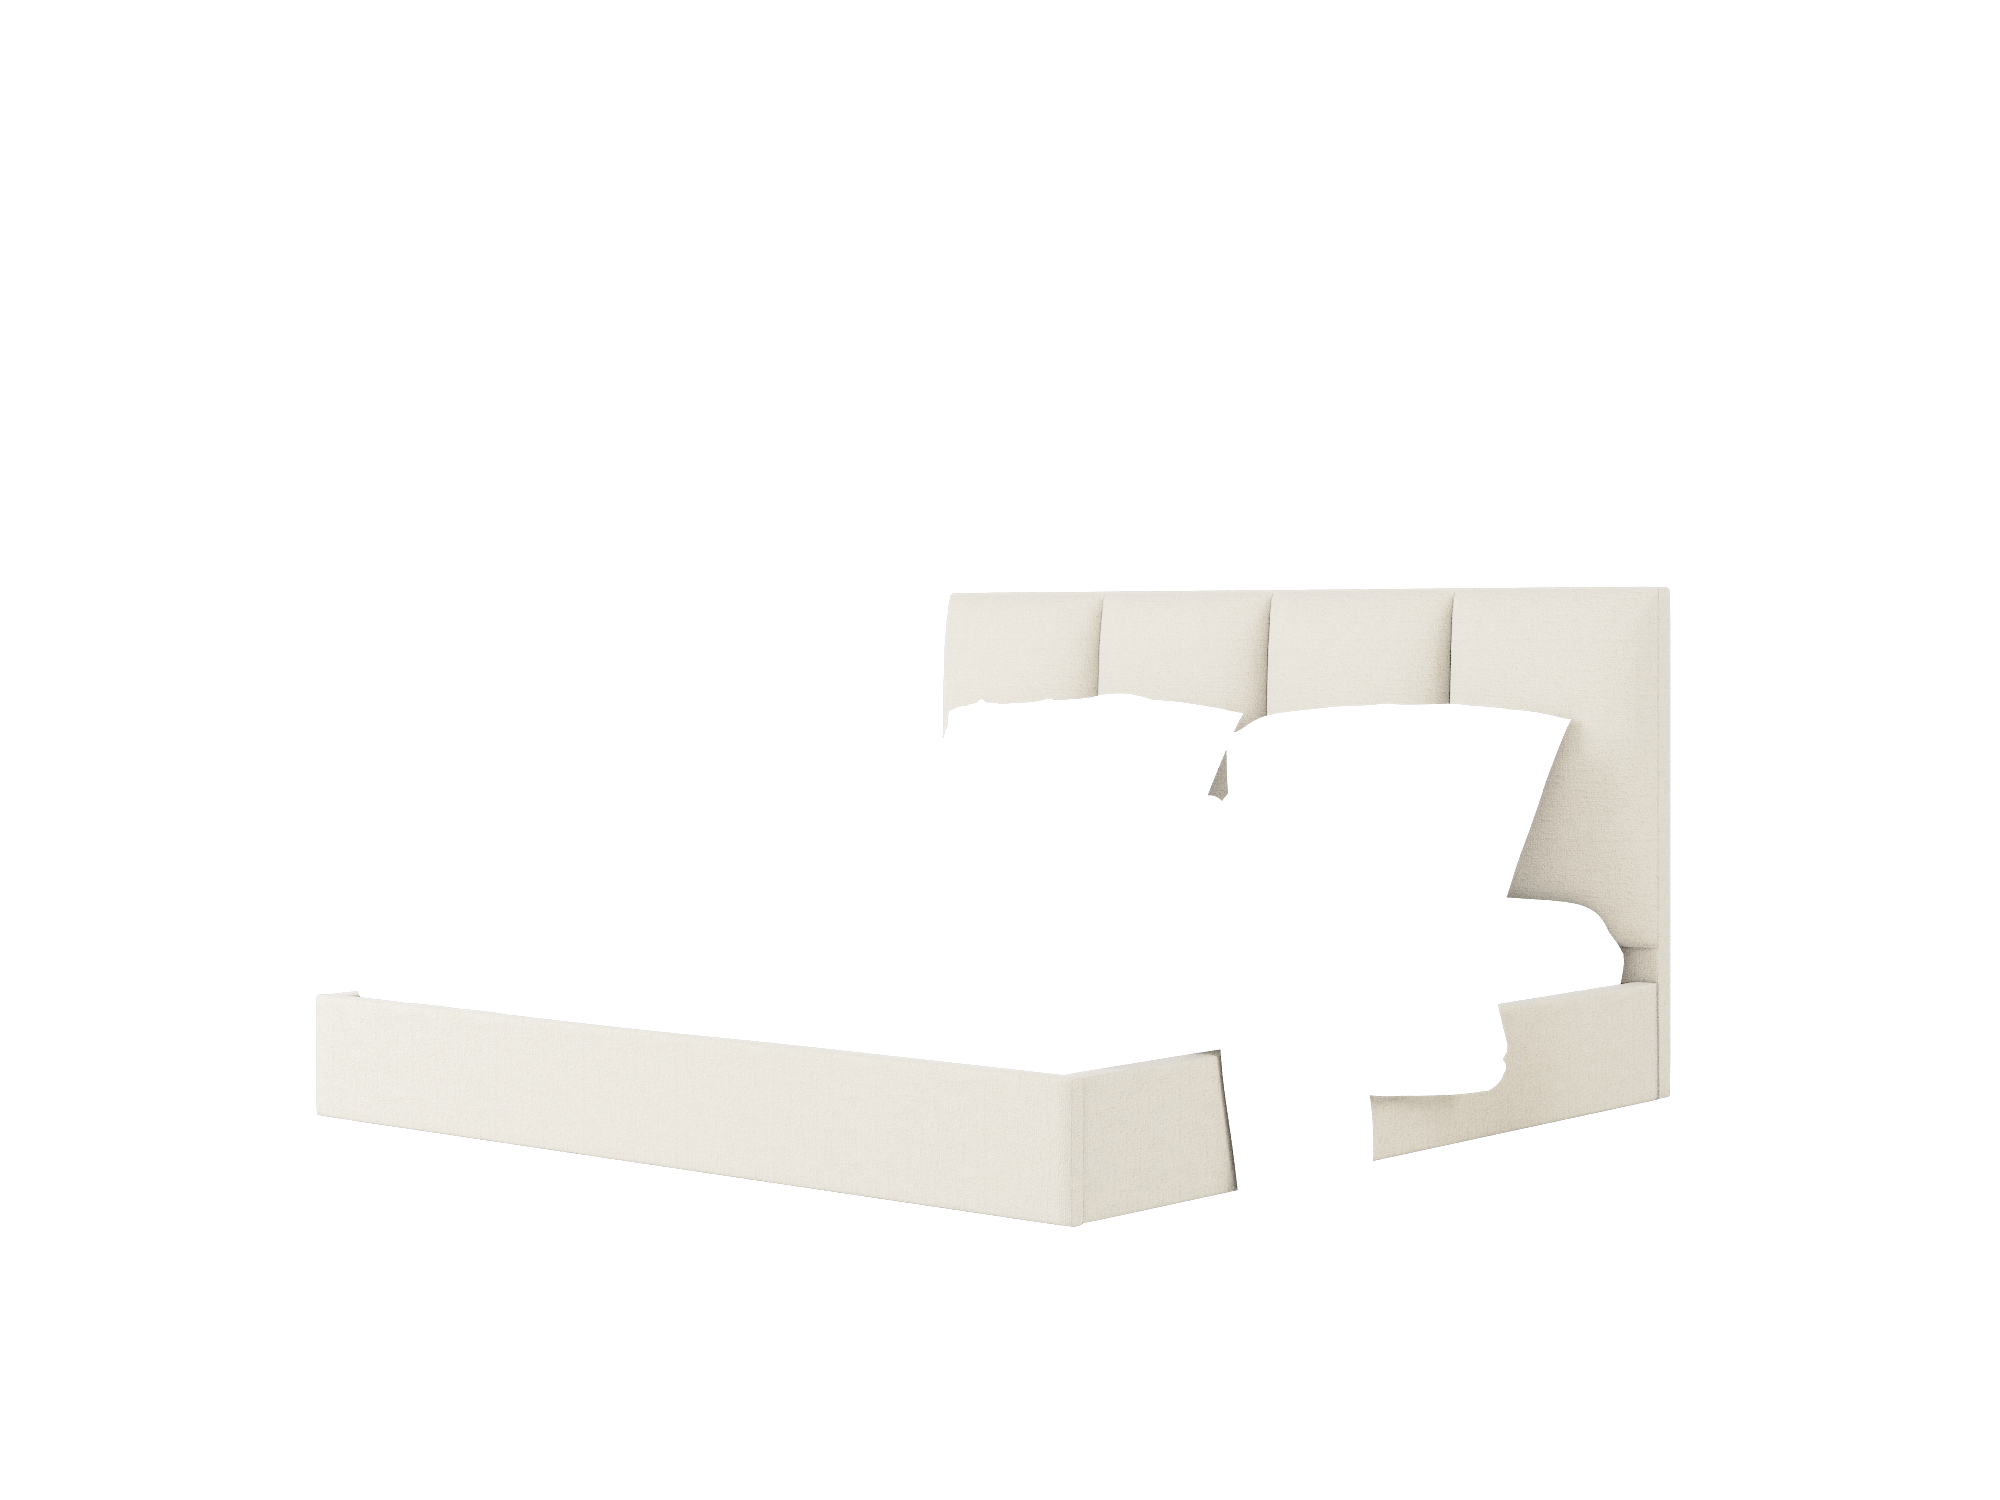 Celine Insight Dove Bed King Room Texture